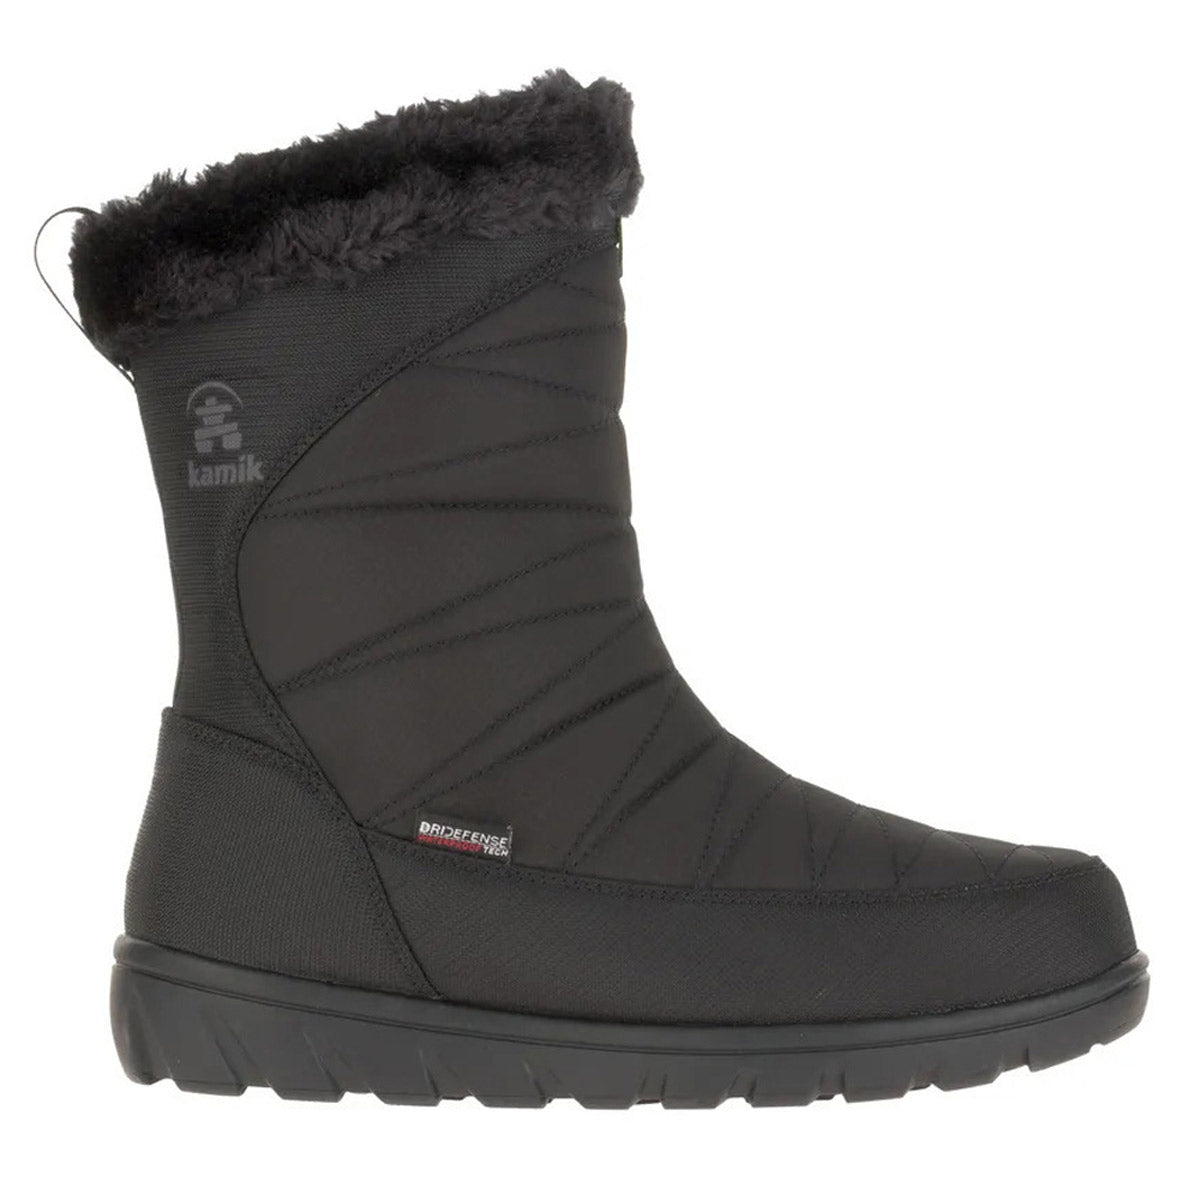 A KAMIK HANNAH ZIP WIDE WIDTH BLACK - WOMENS waterproof, insulated winter boot with a fur collar and a rubber sole.